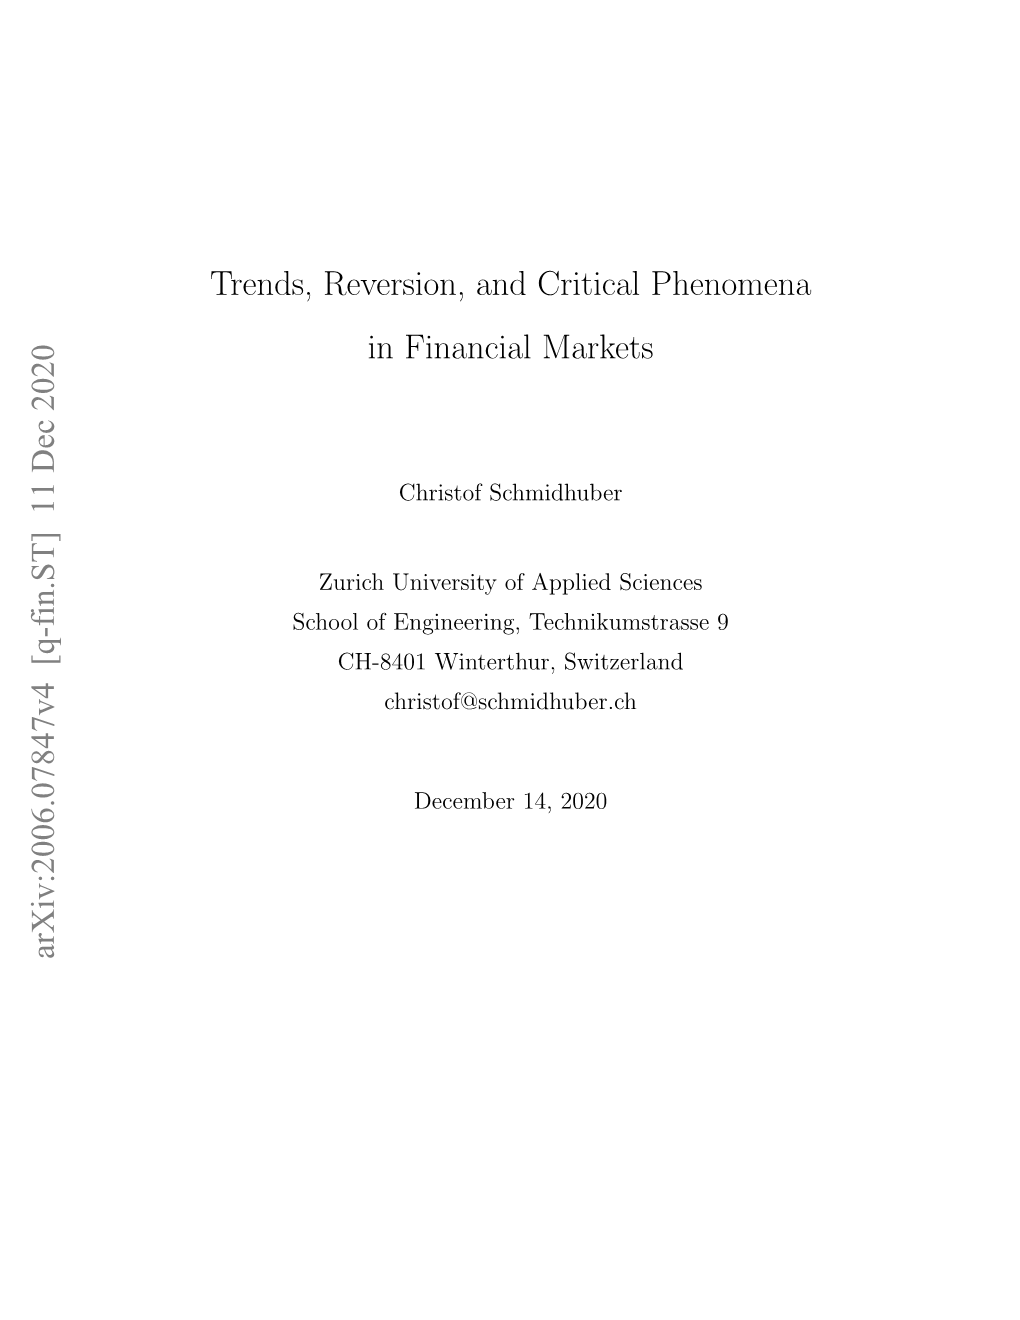 Trends, Reversion, and Critical Phenomena in Financial Markets